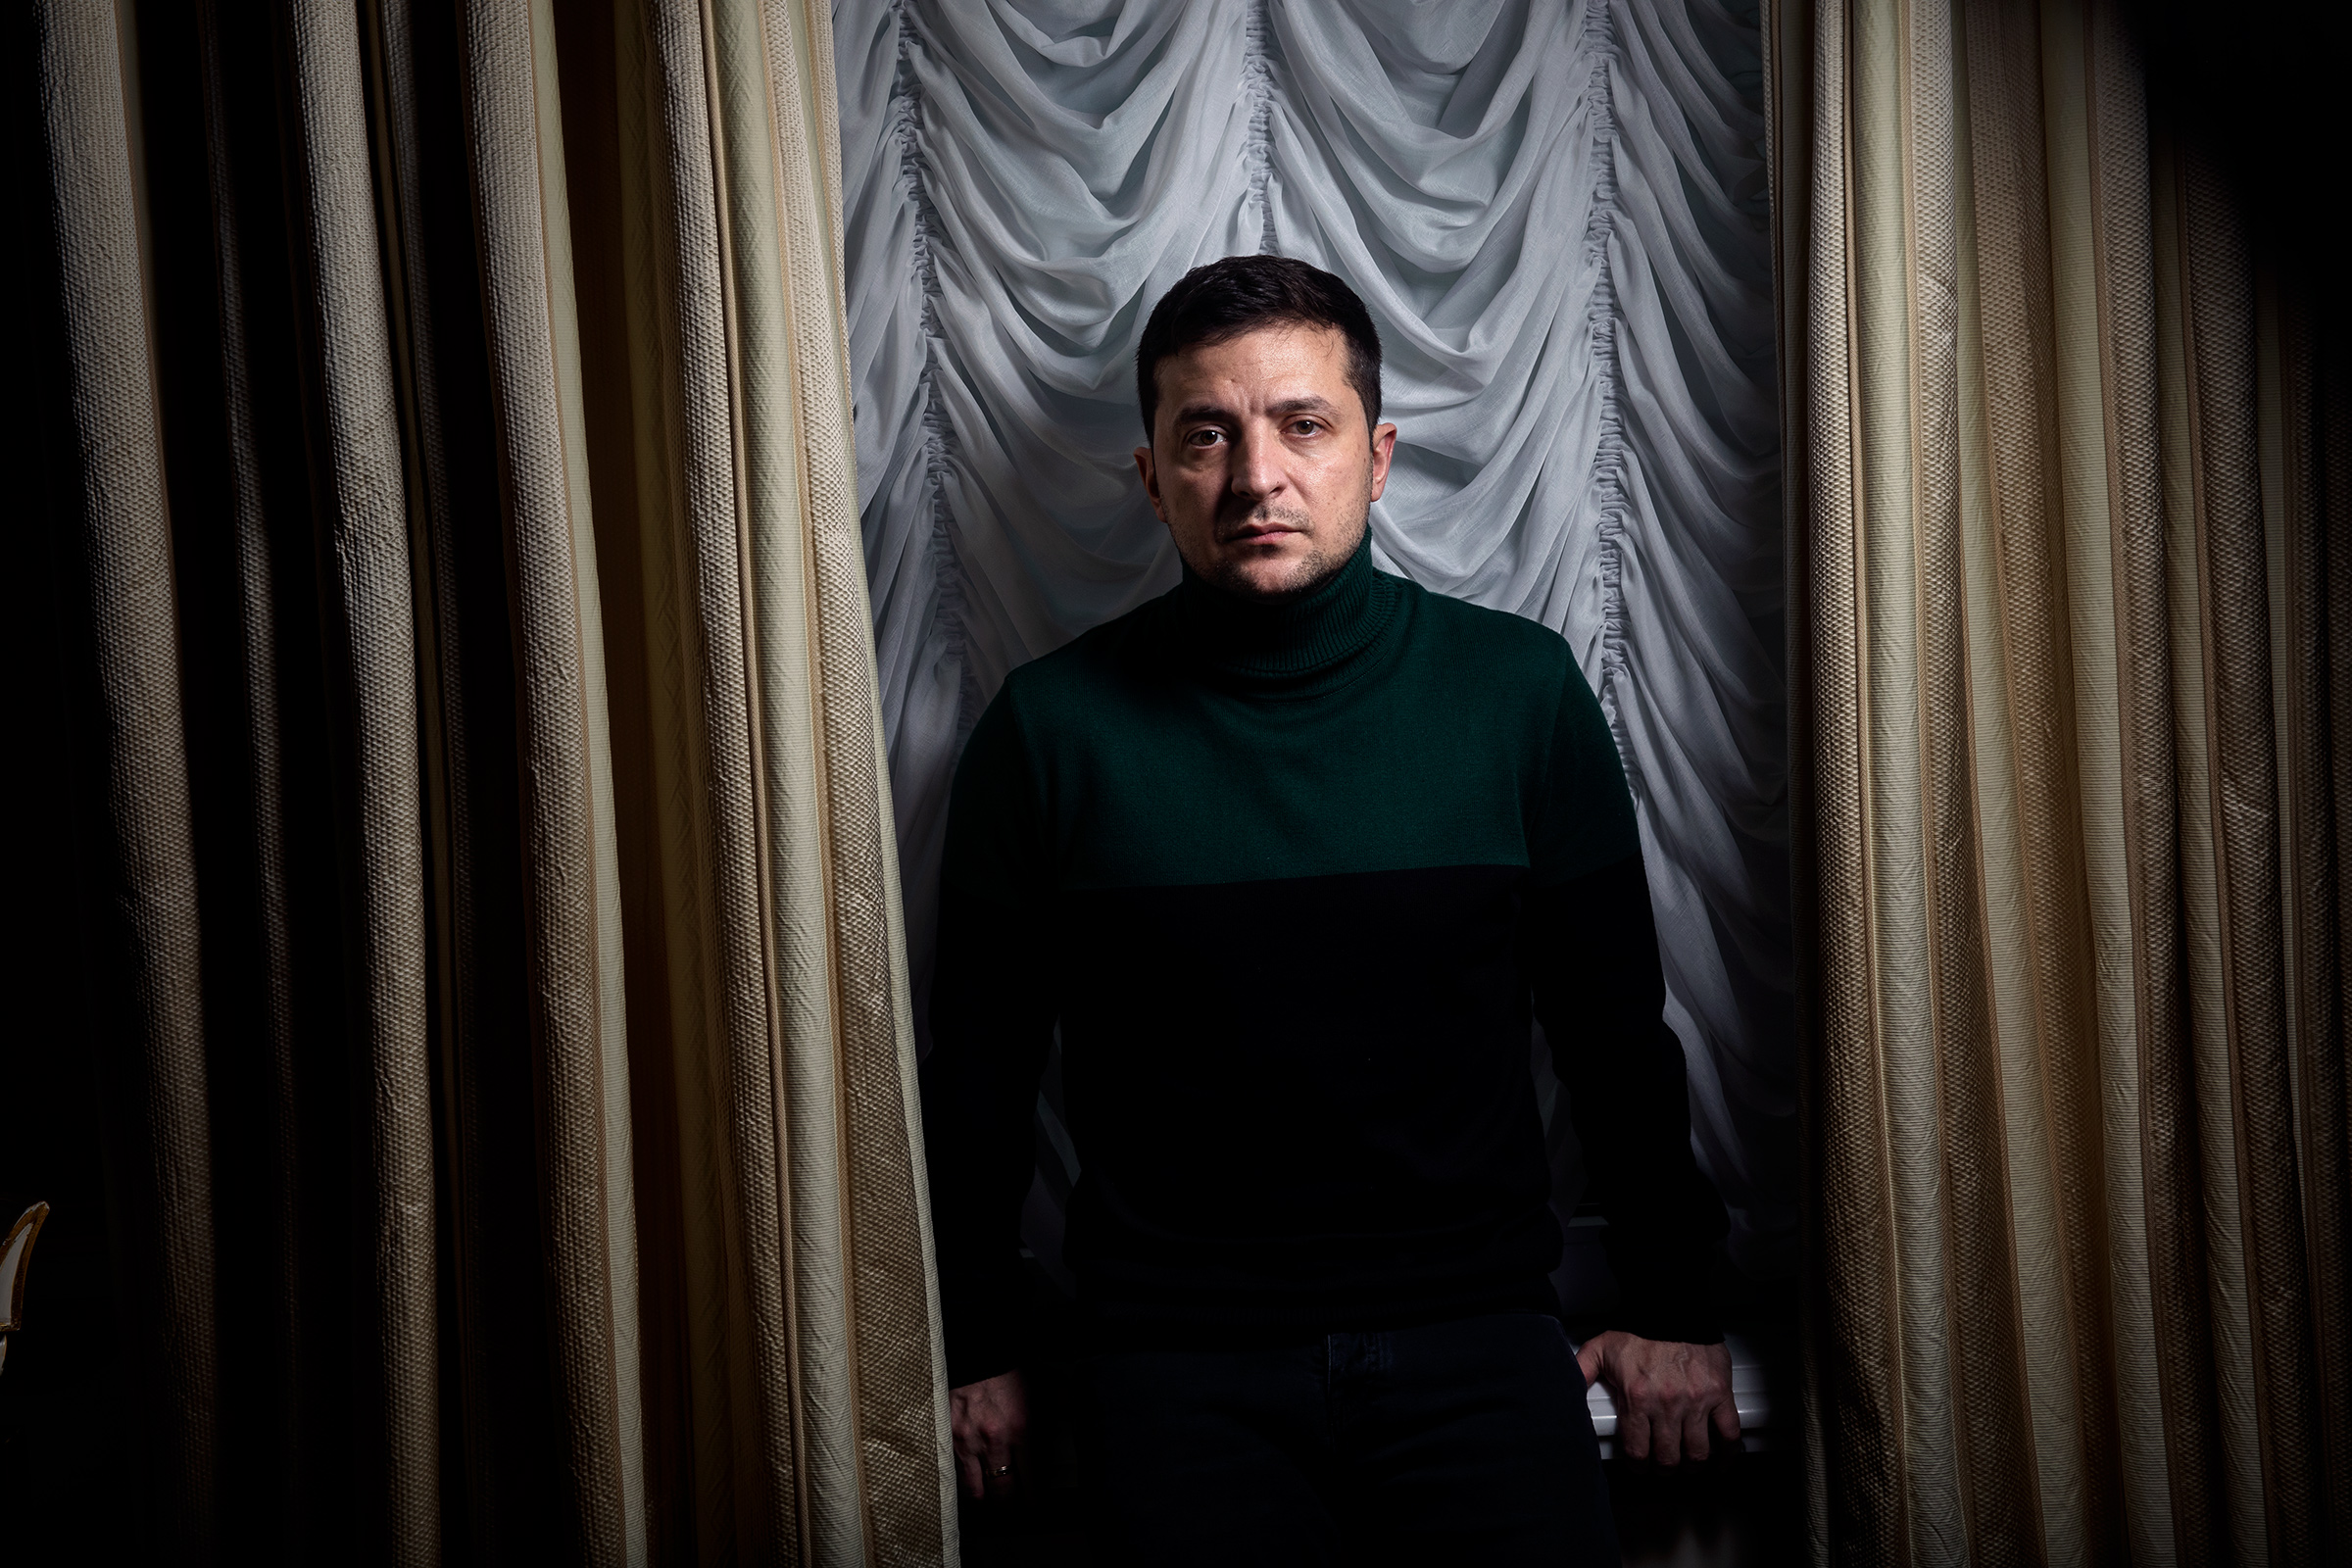 Zelensky on Nov. 30 in his Kyiv office, which he likens to a “fortress that I just want to escape” (Paolo Pellegrin—Magnum Photos for TIME)